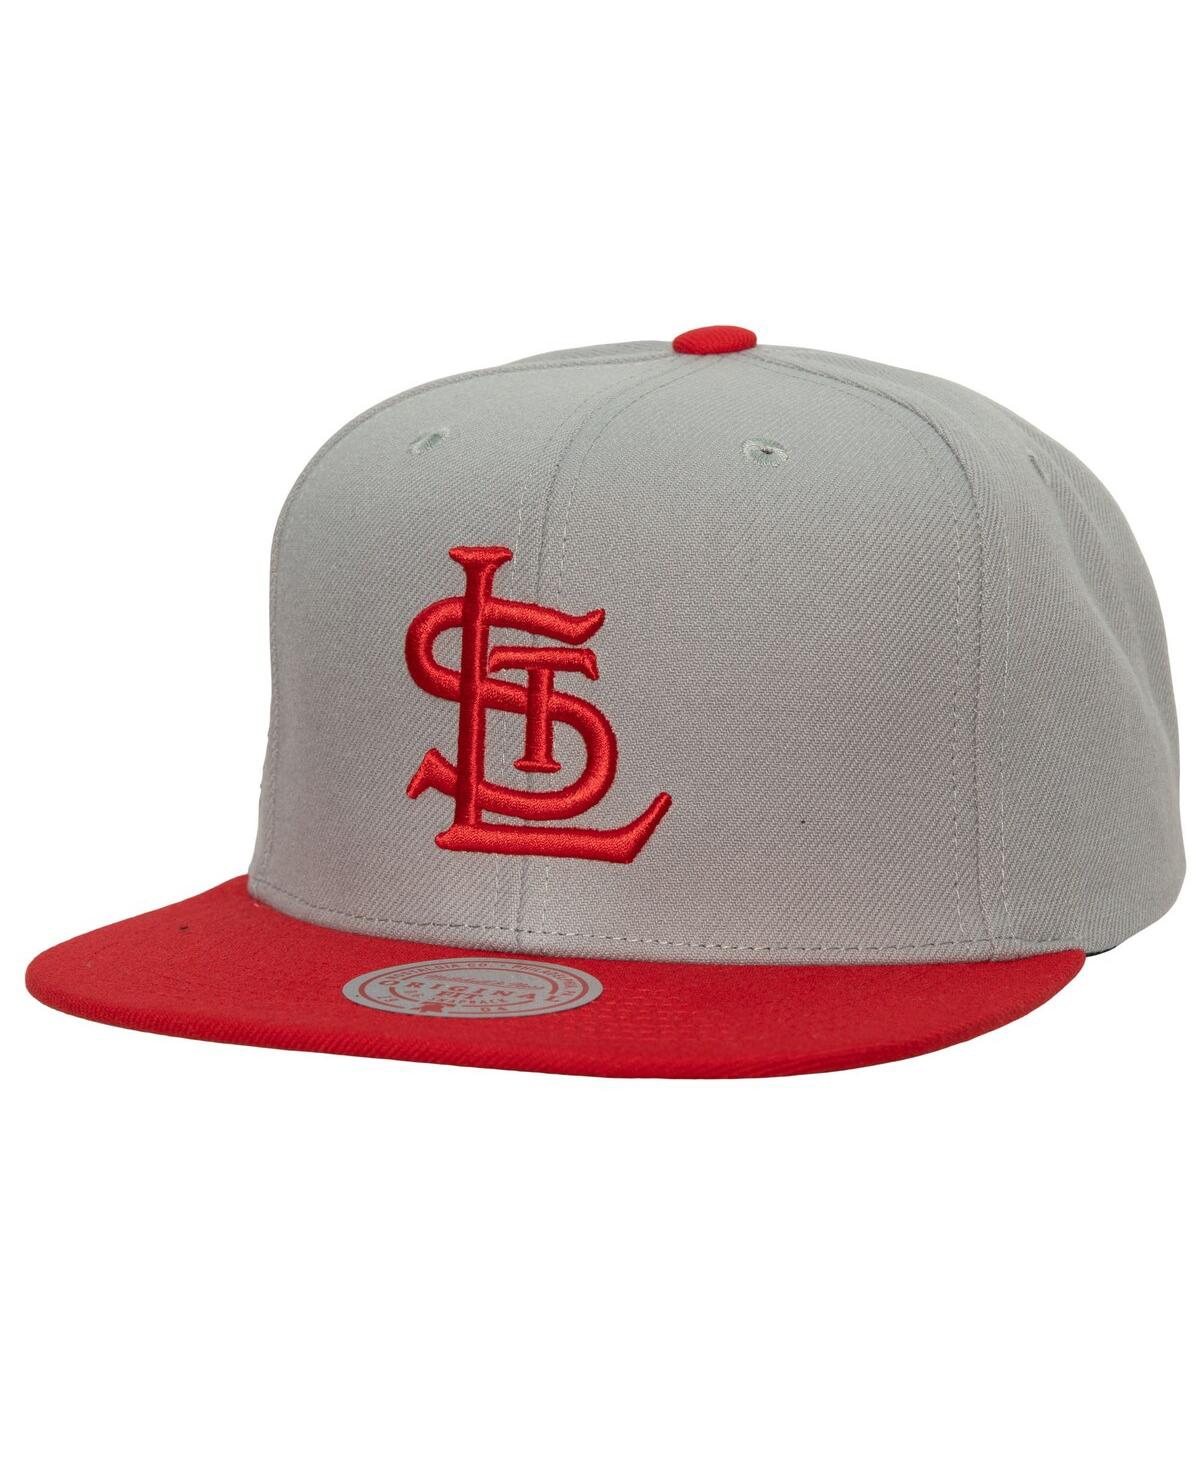 Mitchell & Ness Men's  Gray St. Louis Cardinals Cooperstown Collection Away Snapback Hat